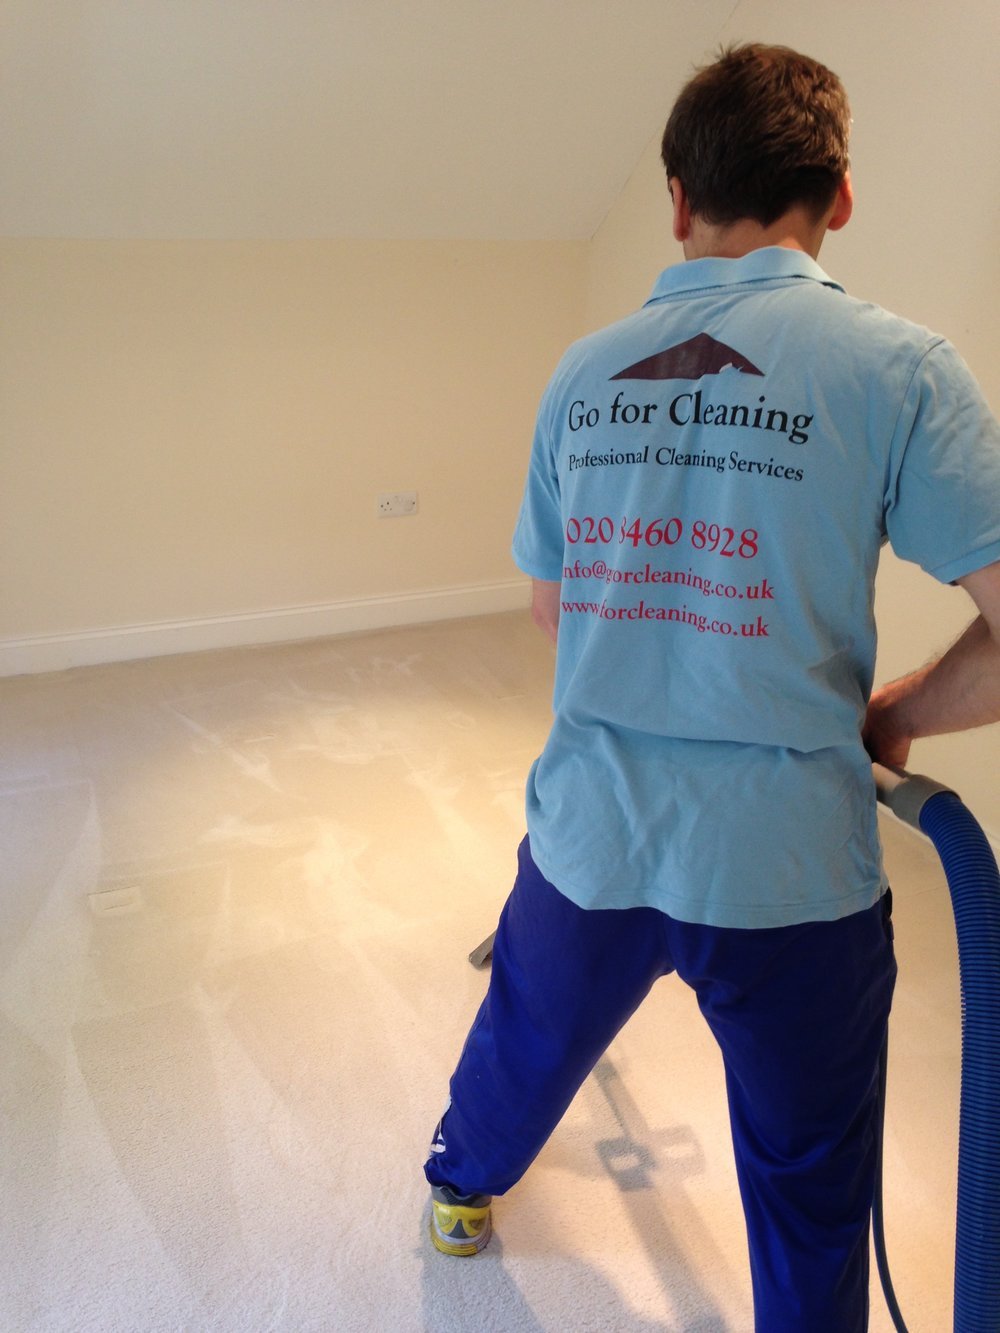 Finding Your Carpet Cleaner in London, Where to Look?